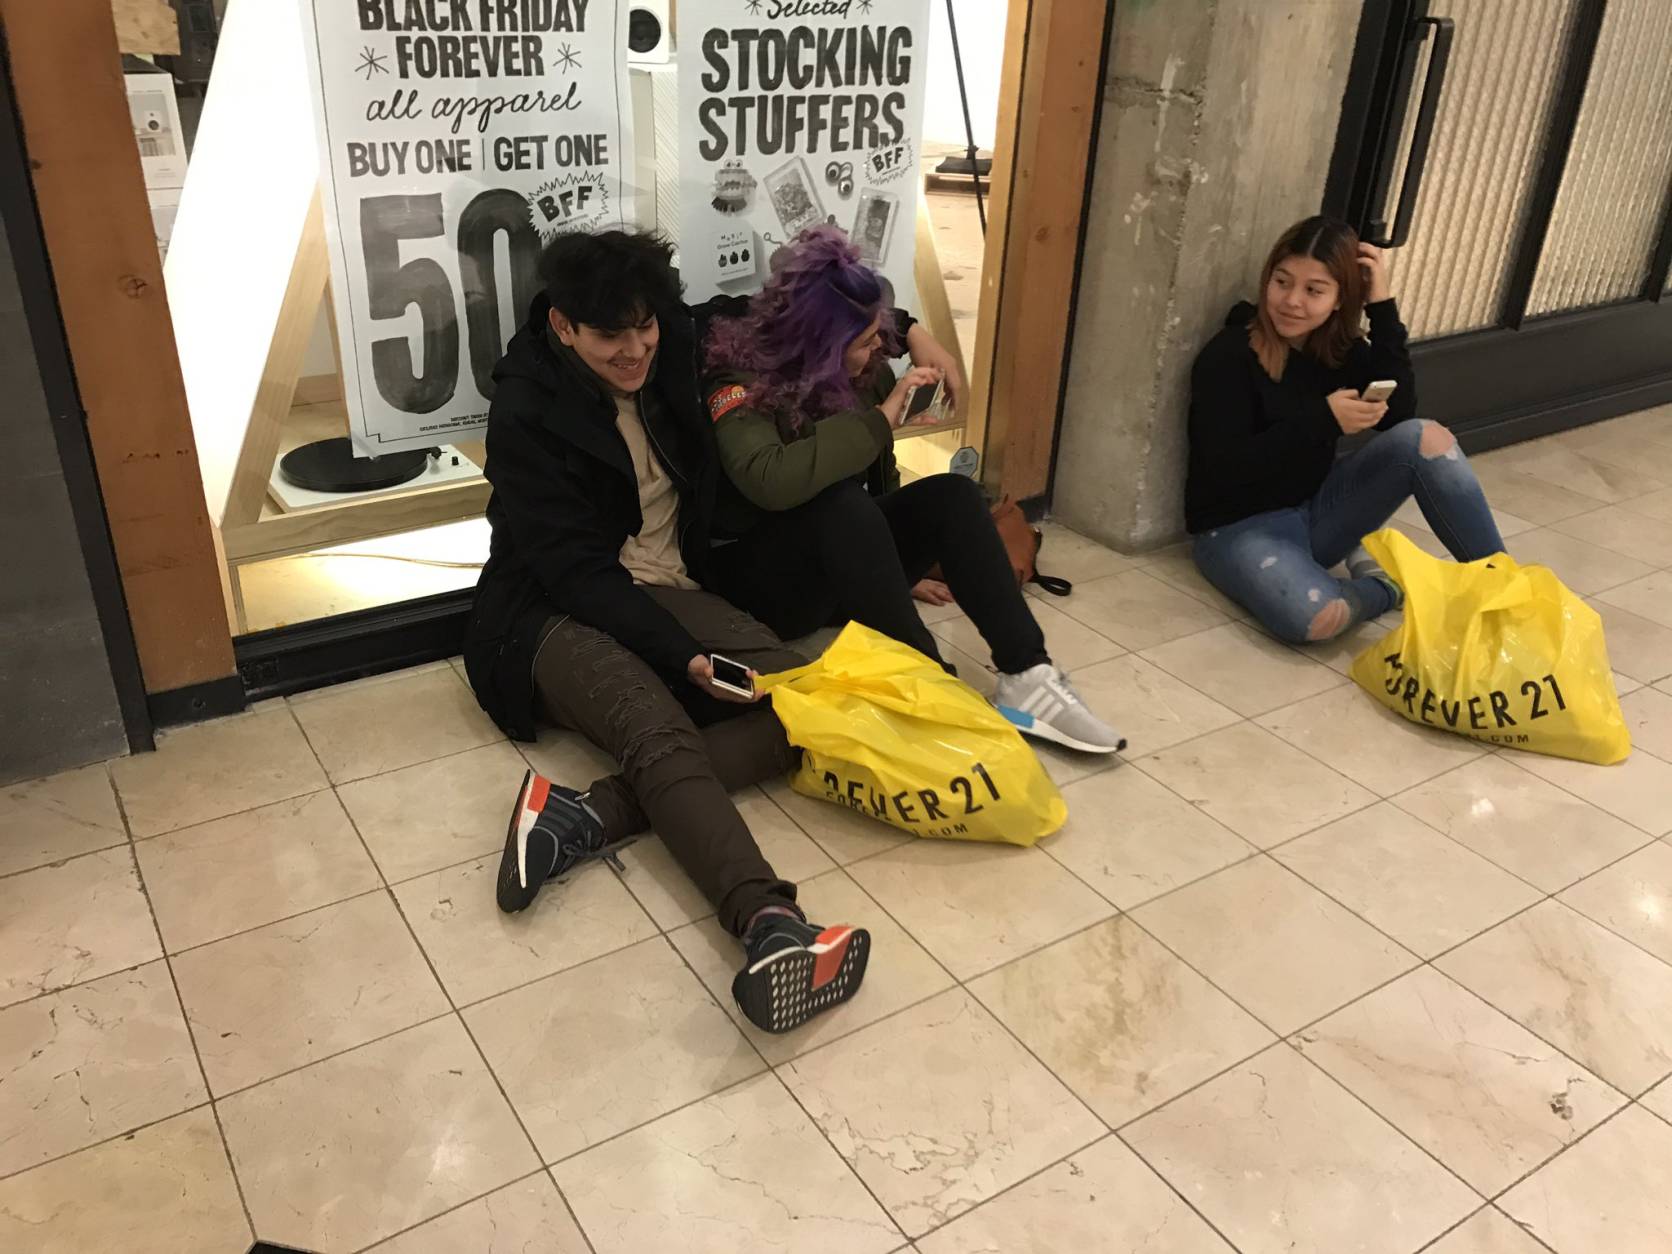 "50 percent off a coat brought this couple to Urban Outfitters," WTOP's Neal Augenstein reports.